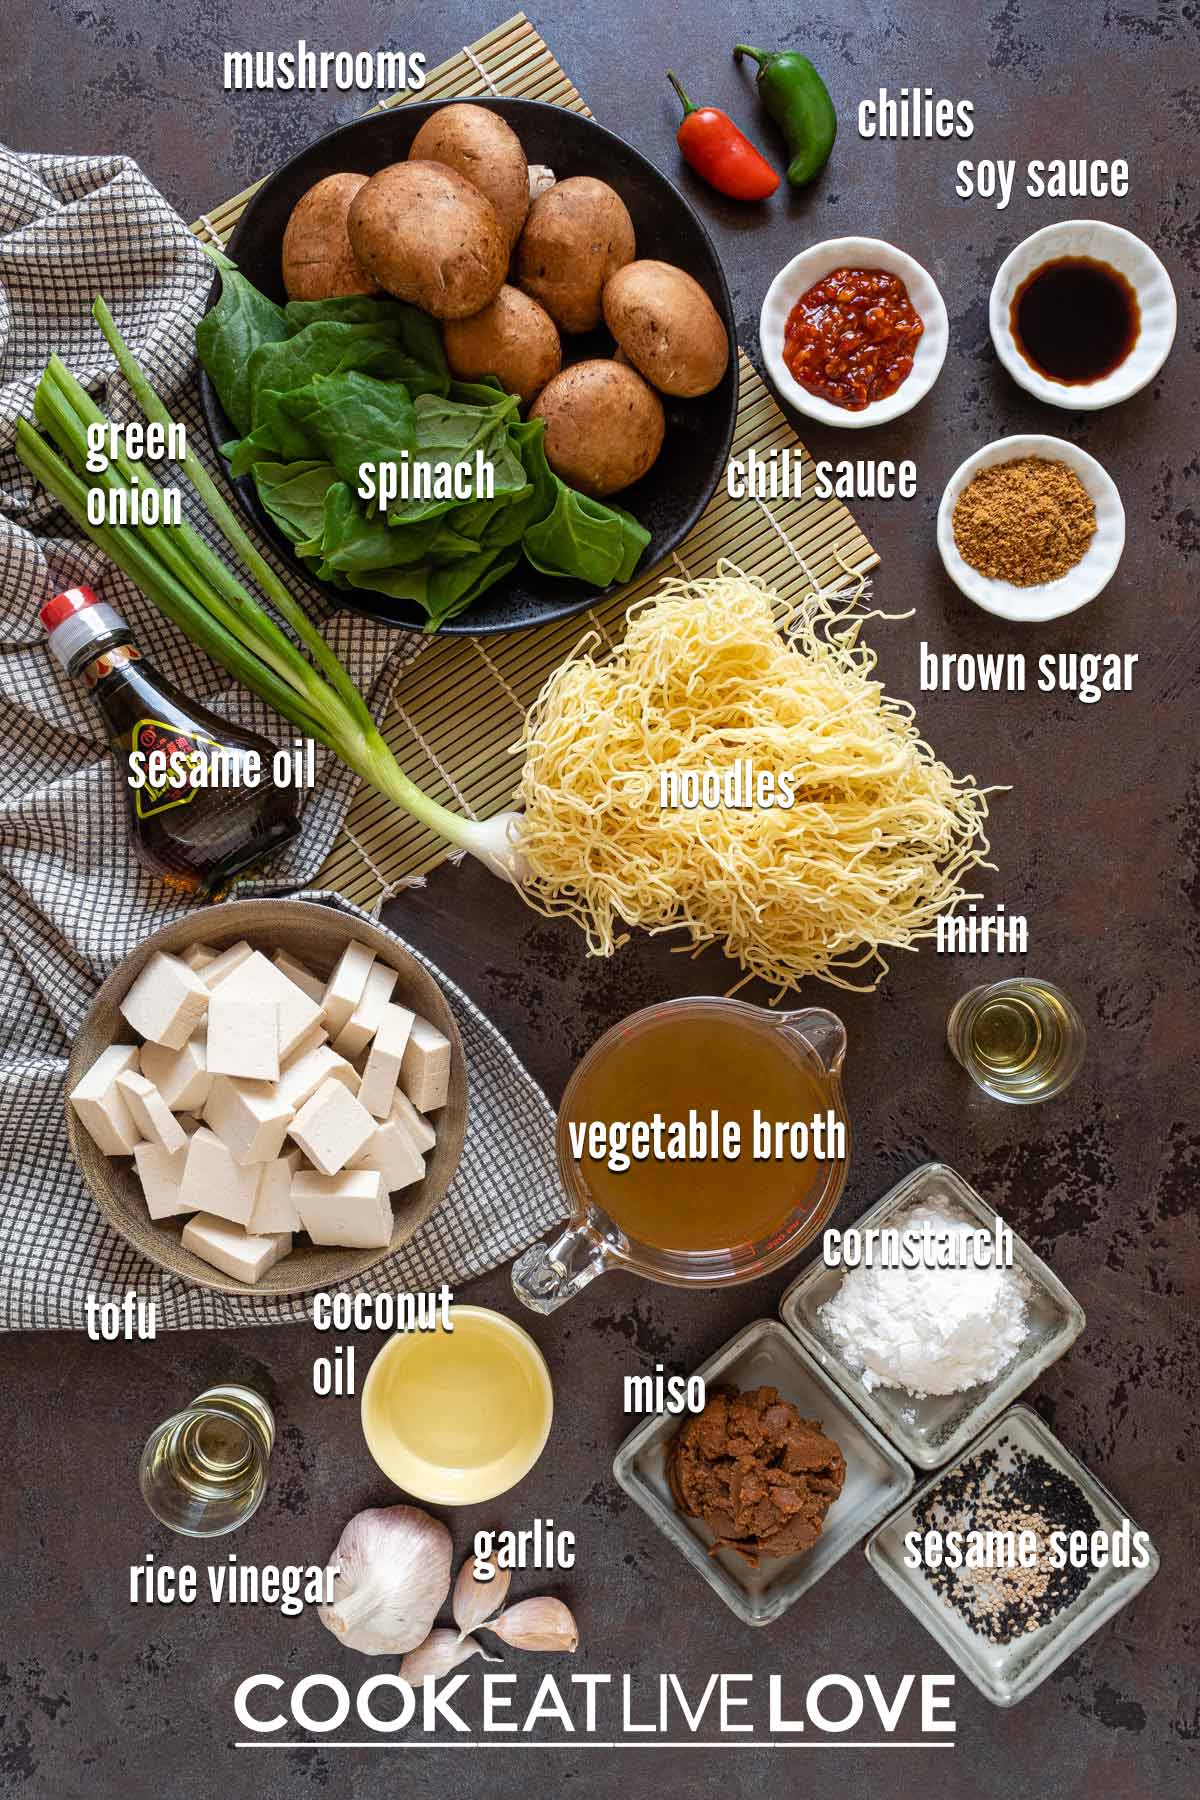 Ingredients to make vegan tofu ramen on the table with text labels.